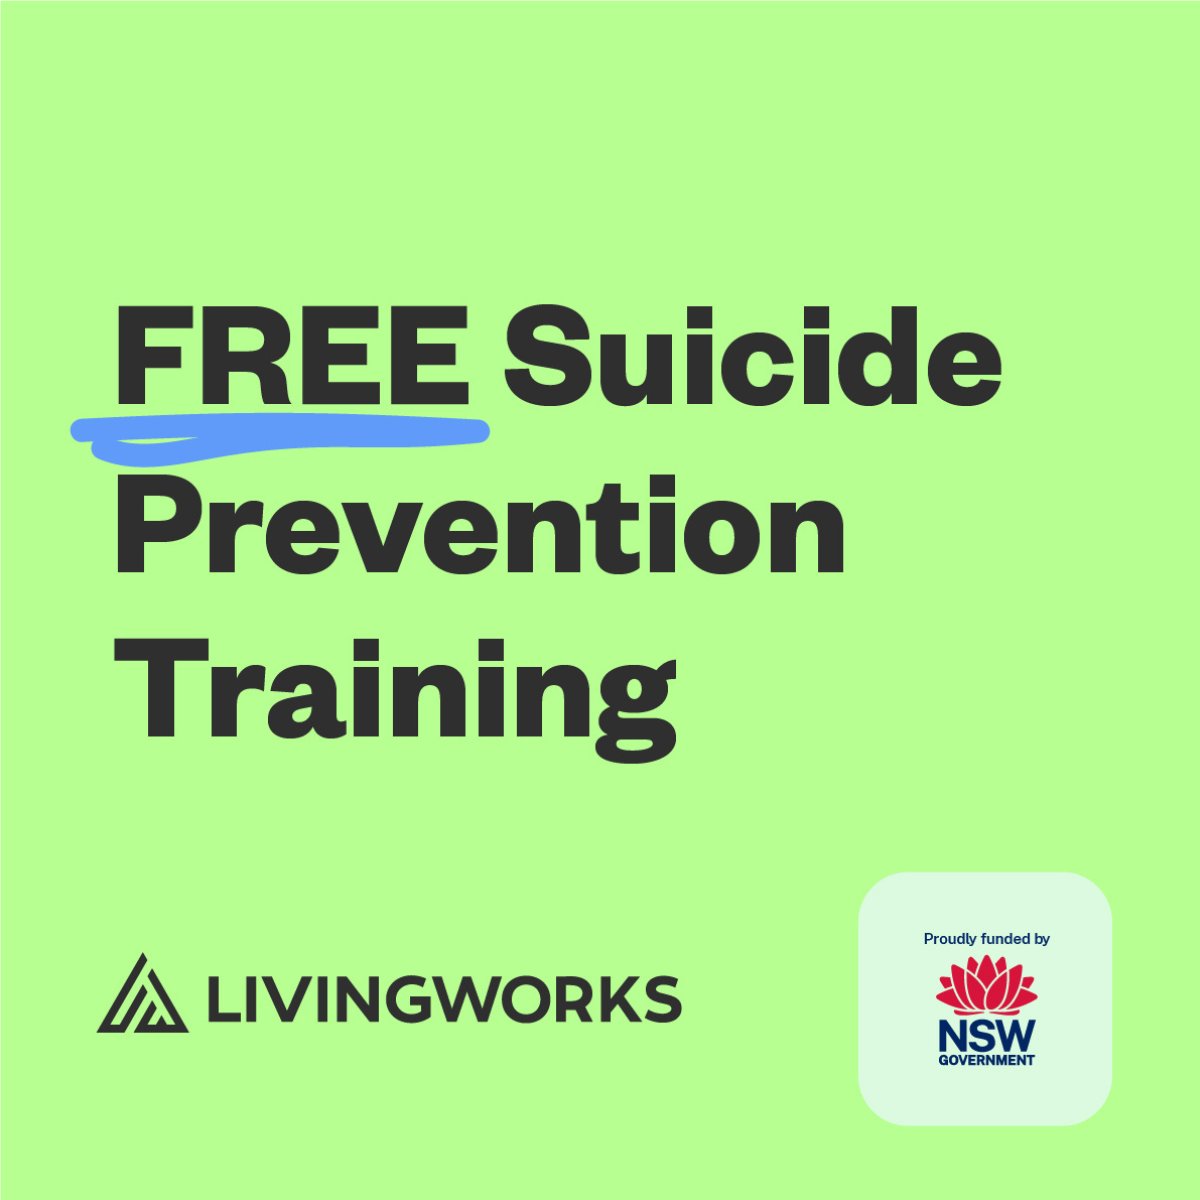 Learn the world's leading suicide prevention skills training to support young people at school, in community and at home - visit @LivingWorksAus during #CAMH24 for more detail on training currently available for free funded by NSW Health hubs.li/Q02pynhB0